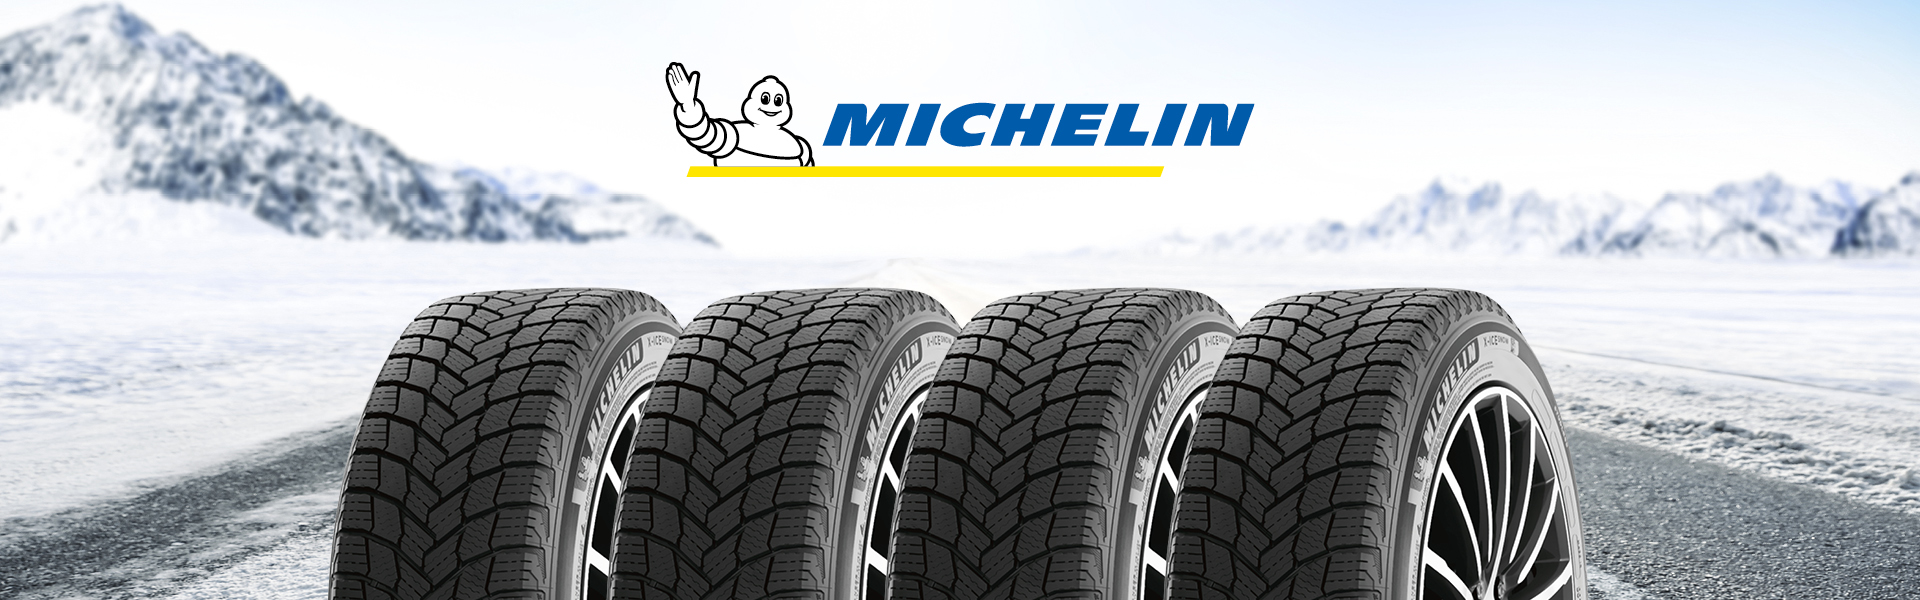 Michelin snow tires image